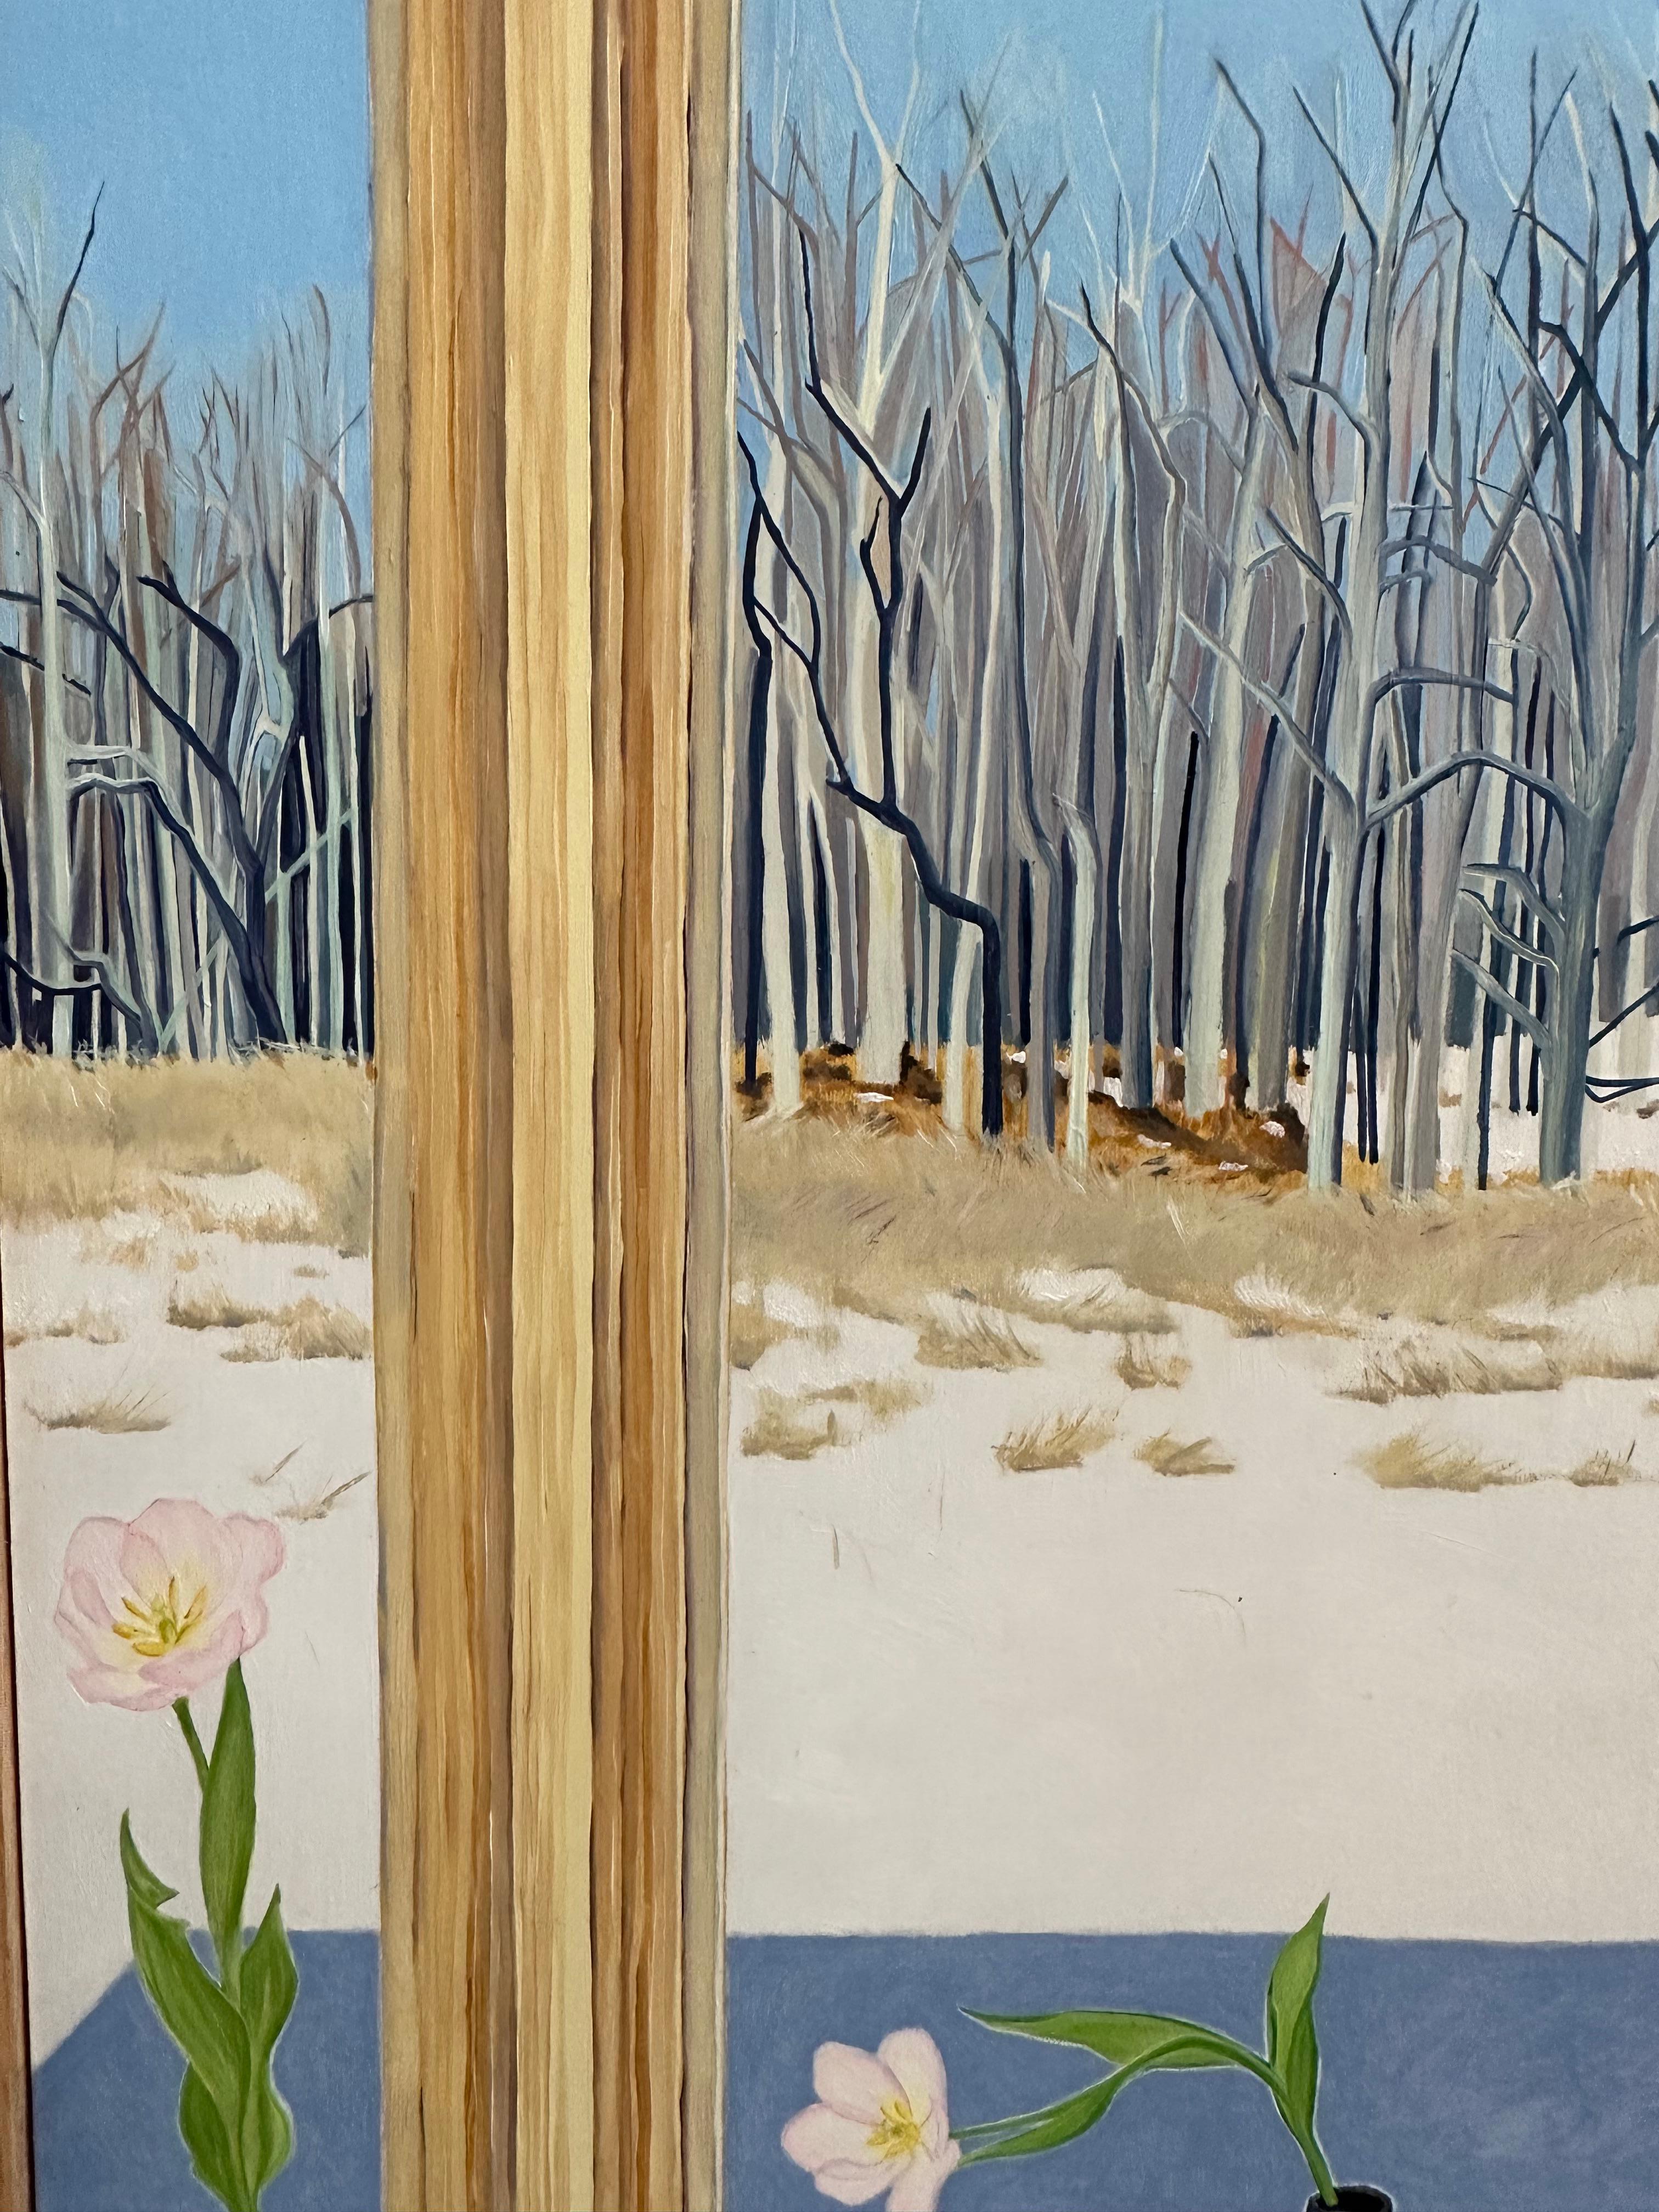 White tulips with a light pink hue sit on a wooden windowsill while a winter landscape with a snow-covered field and barren trees against a blue sky can be seen outdoors through the window panes. Signed, dated and titled on verso.

Amanda Acker’s